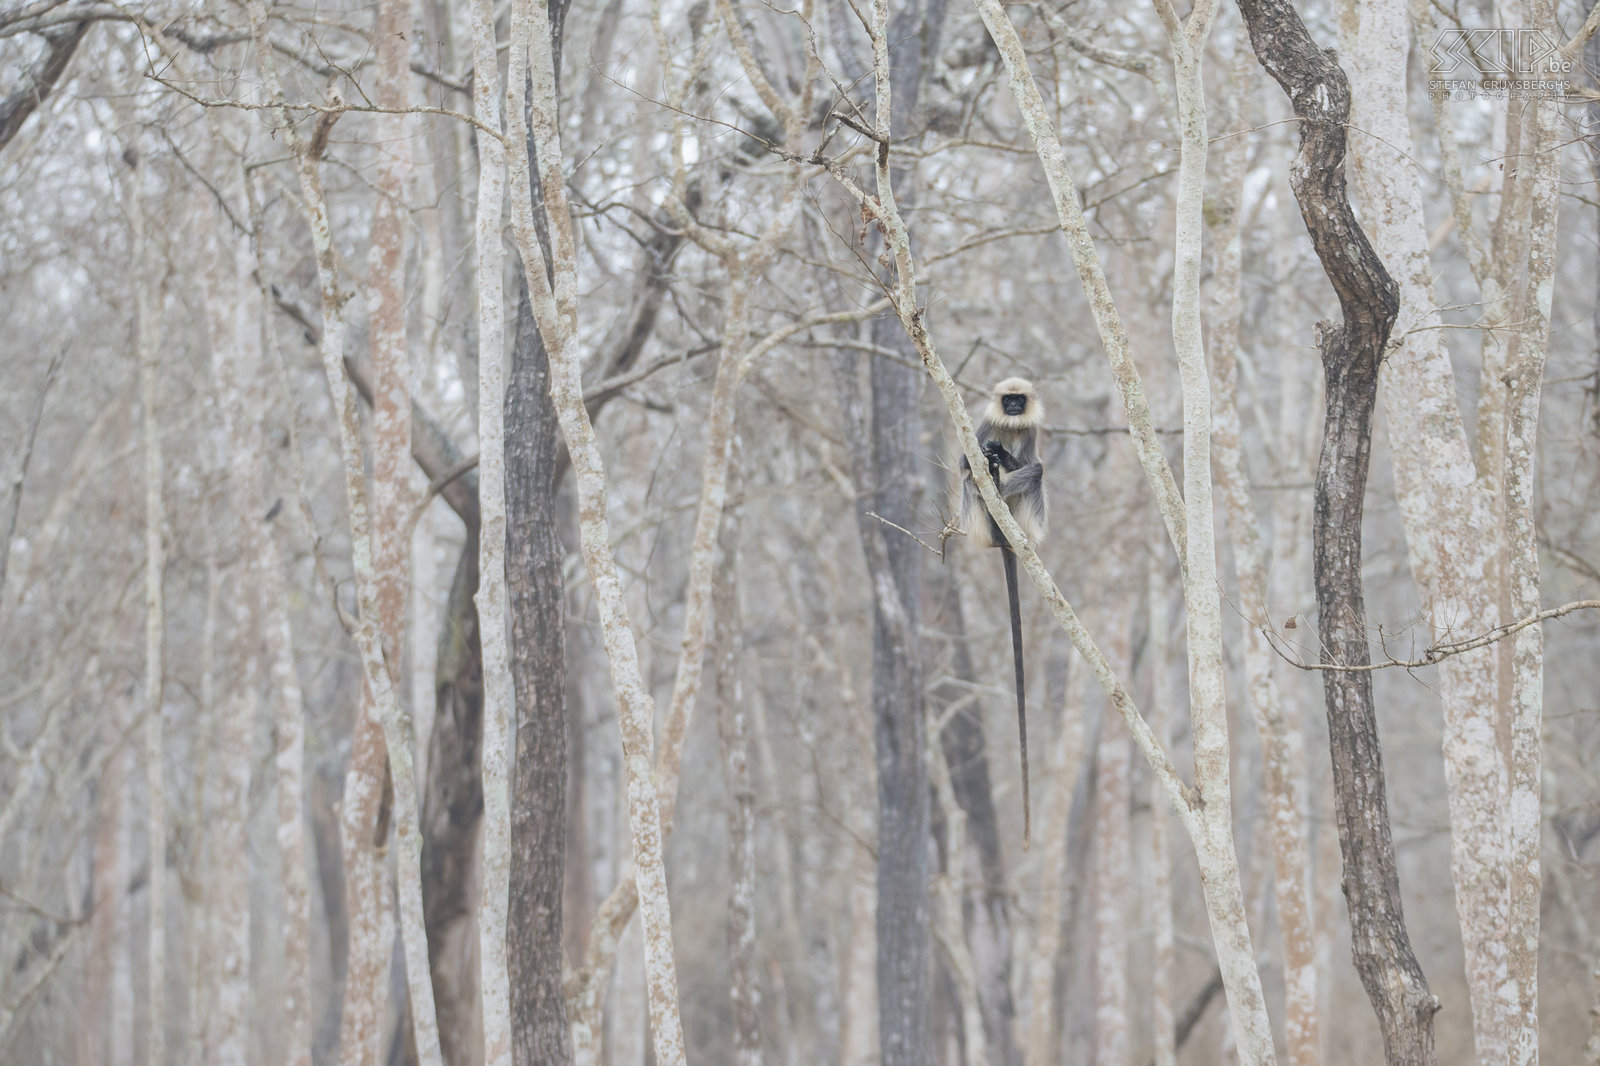 Kabini - Gray langur Gray langurs or Hanuman langurs (Semnopithecus) are the most widespread langurs of South Asia. We went to the jungle of Kabini in February in the dry season when the trees don't have green leaves anymore. Stefan Cruysberghs